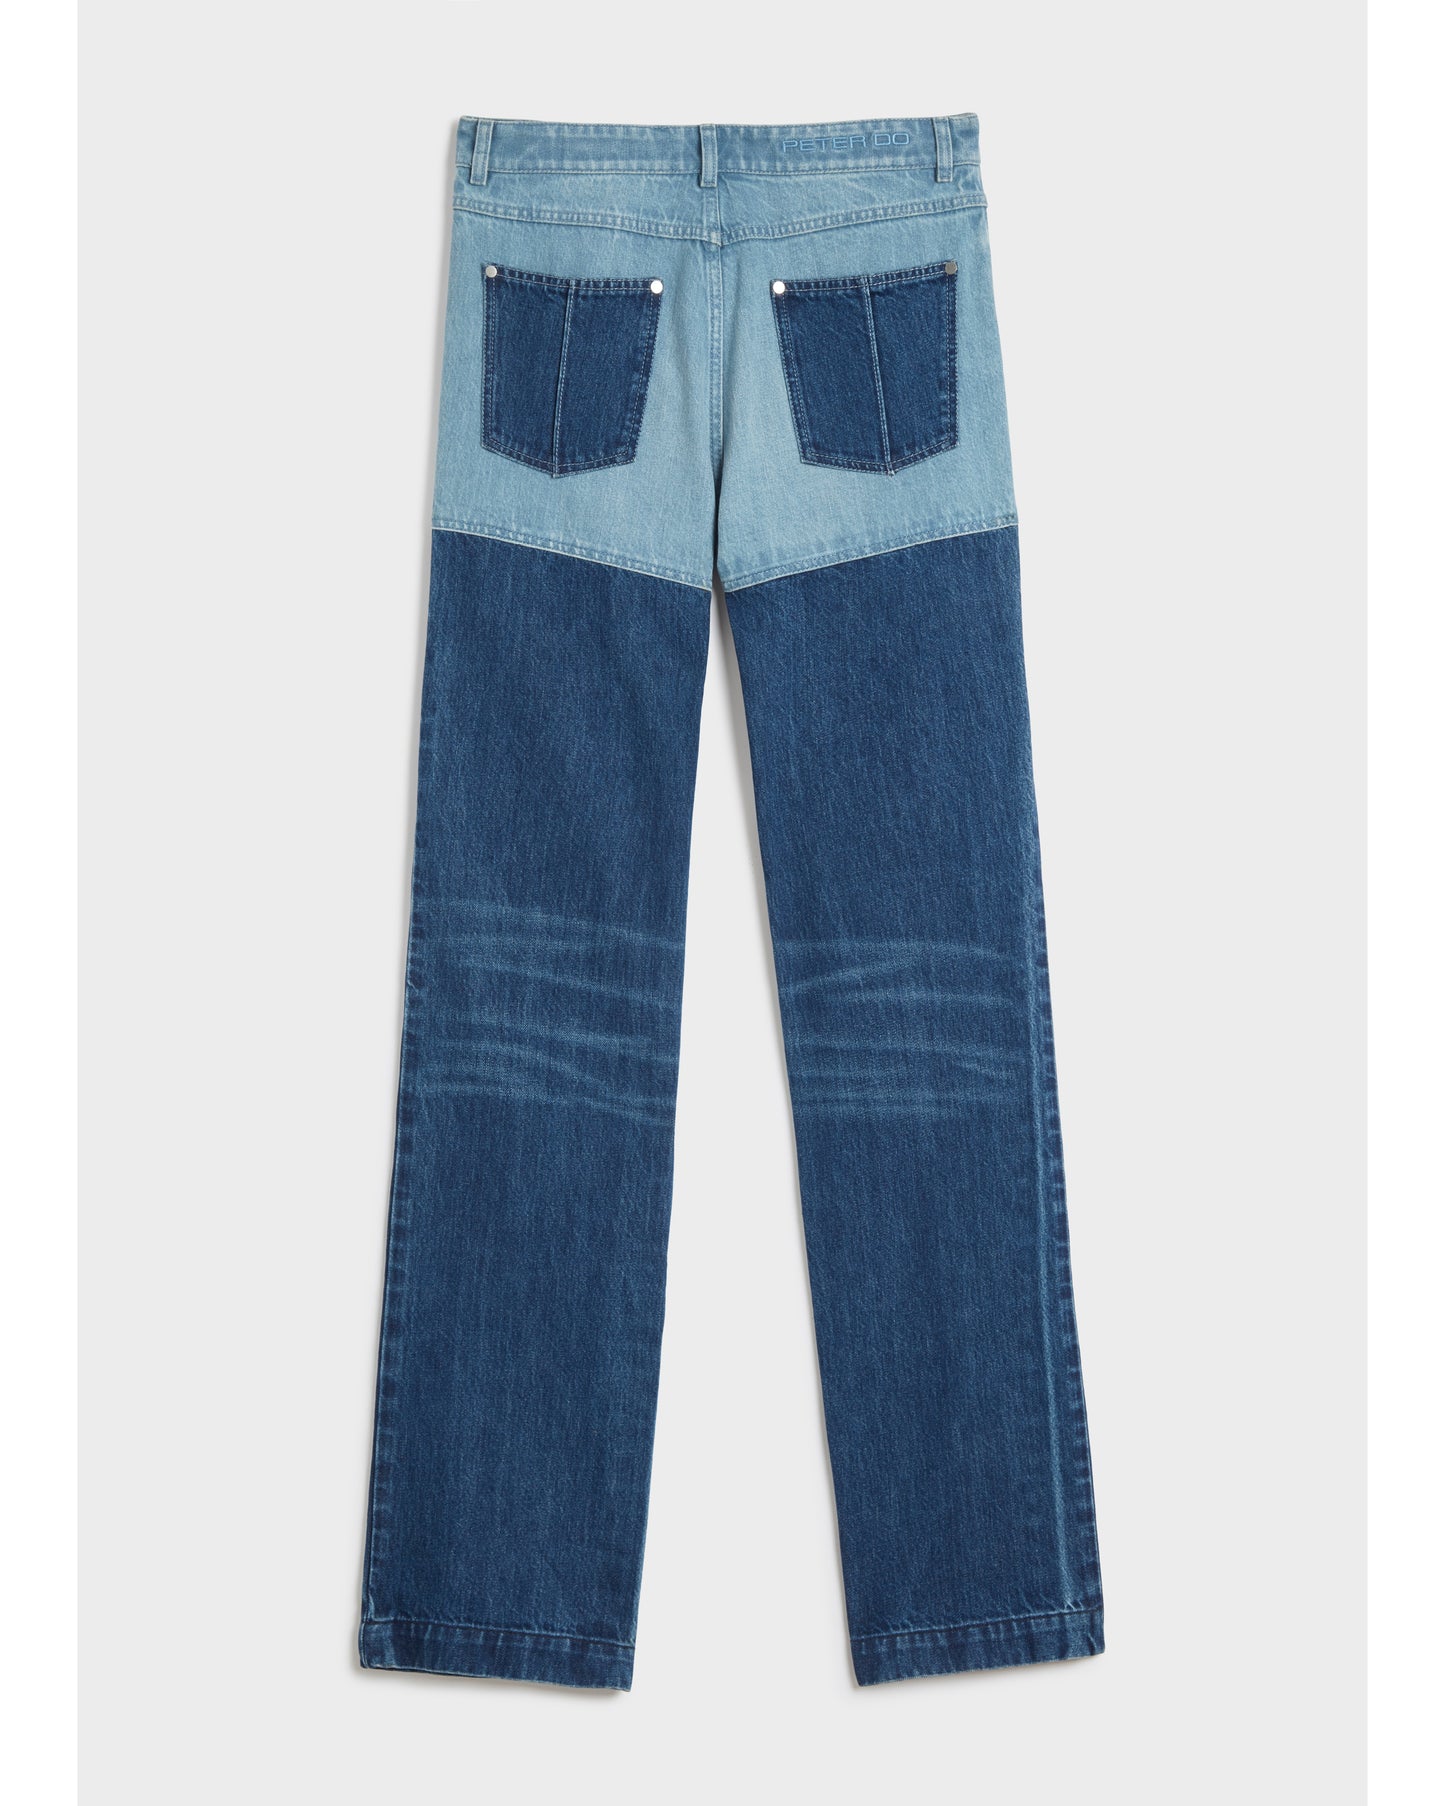 WOMENS COMBO JEANS